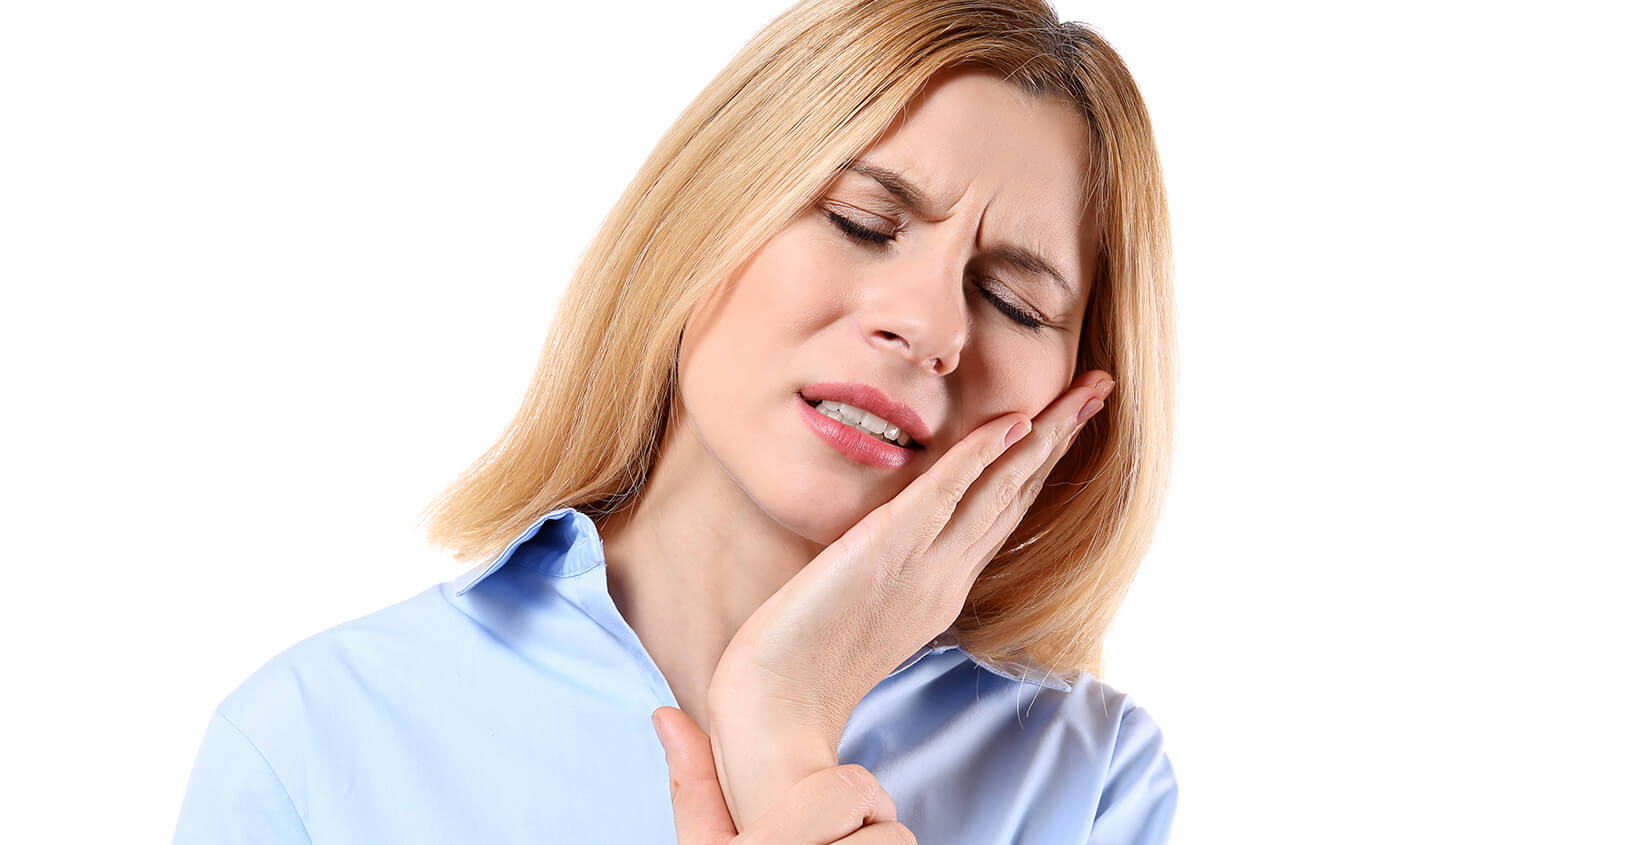 Free yourself from oral pain with Emergency Toothache Relief